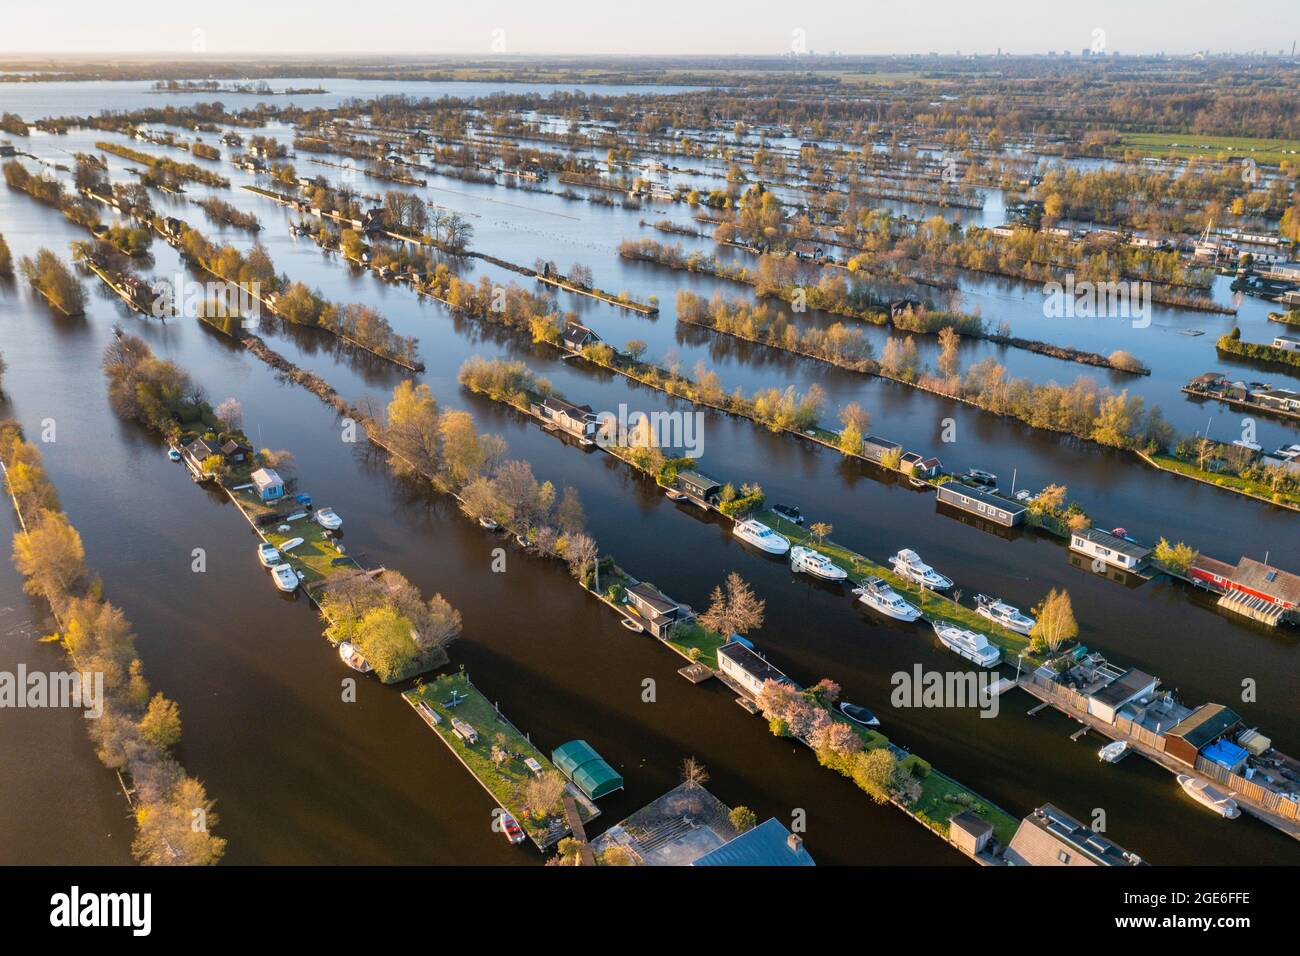 The Netherlands, Breukelen, Marsh land, dugged out for peat. Now serving aquatic sports. On the remaining small islands are housing holiday homes. Aer Stock Photo